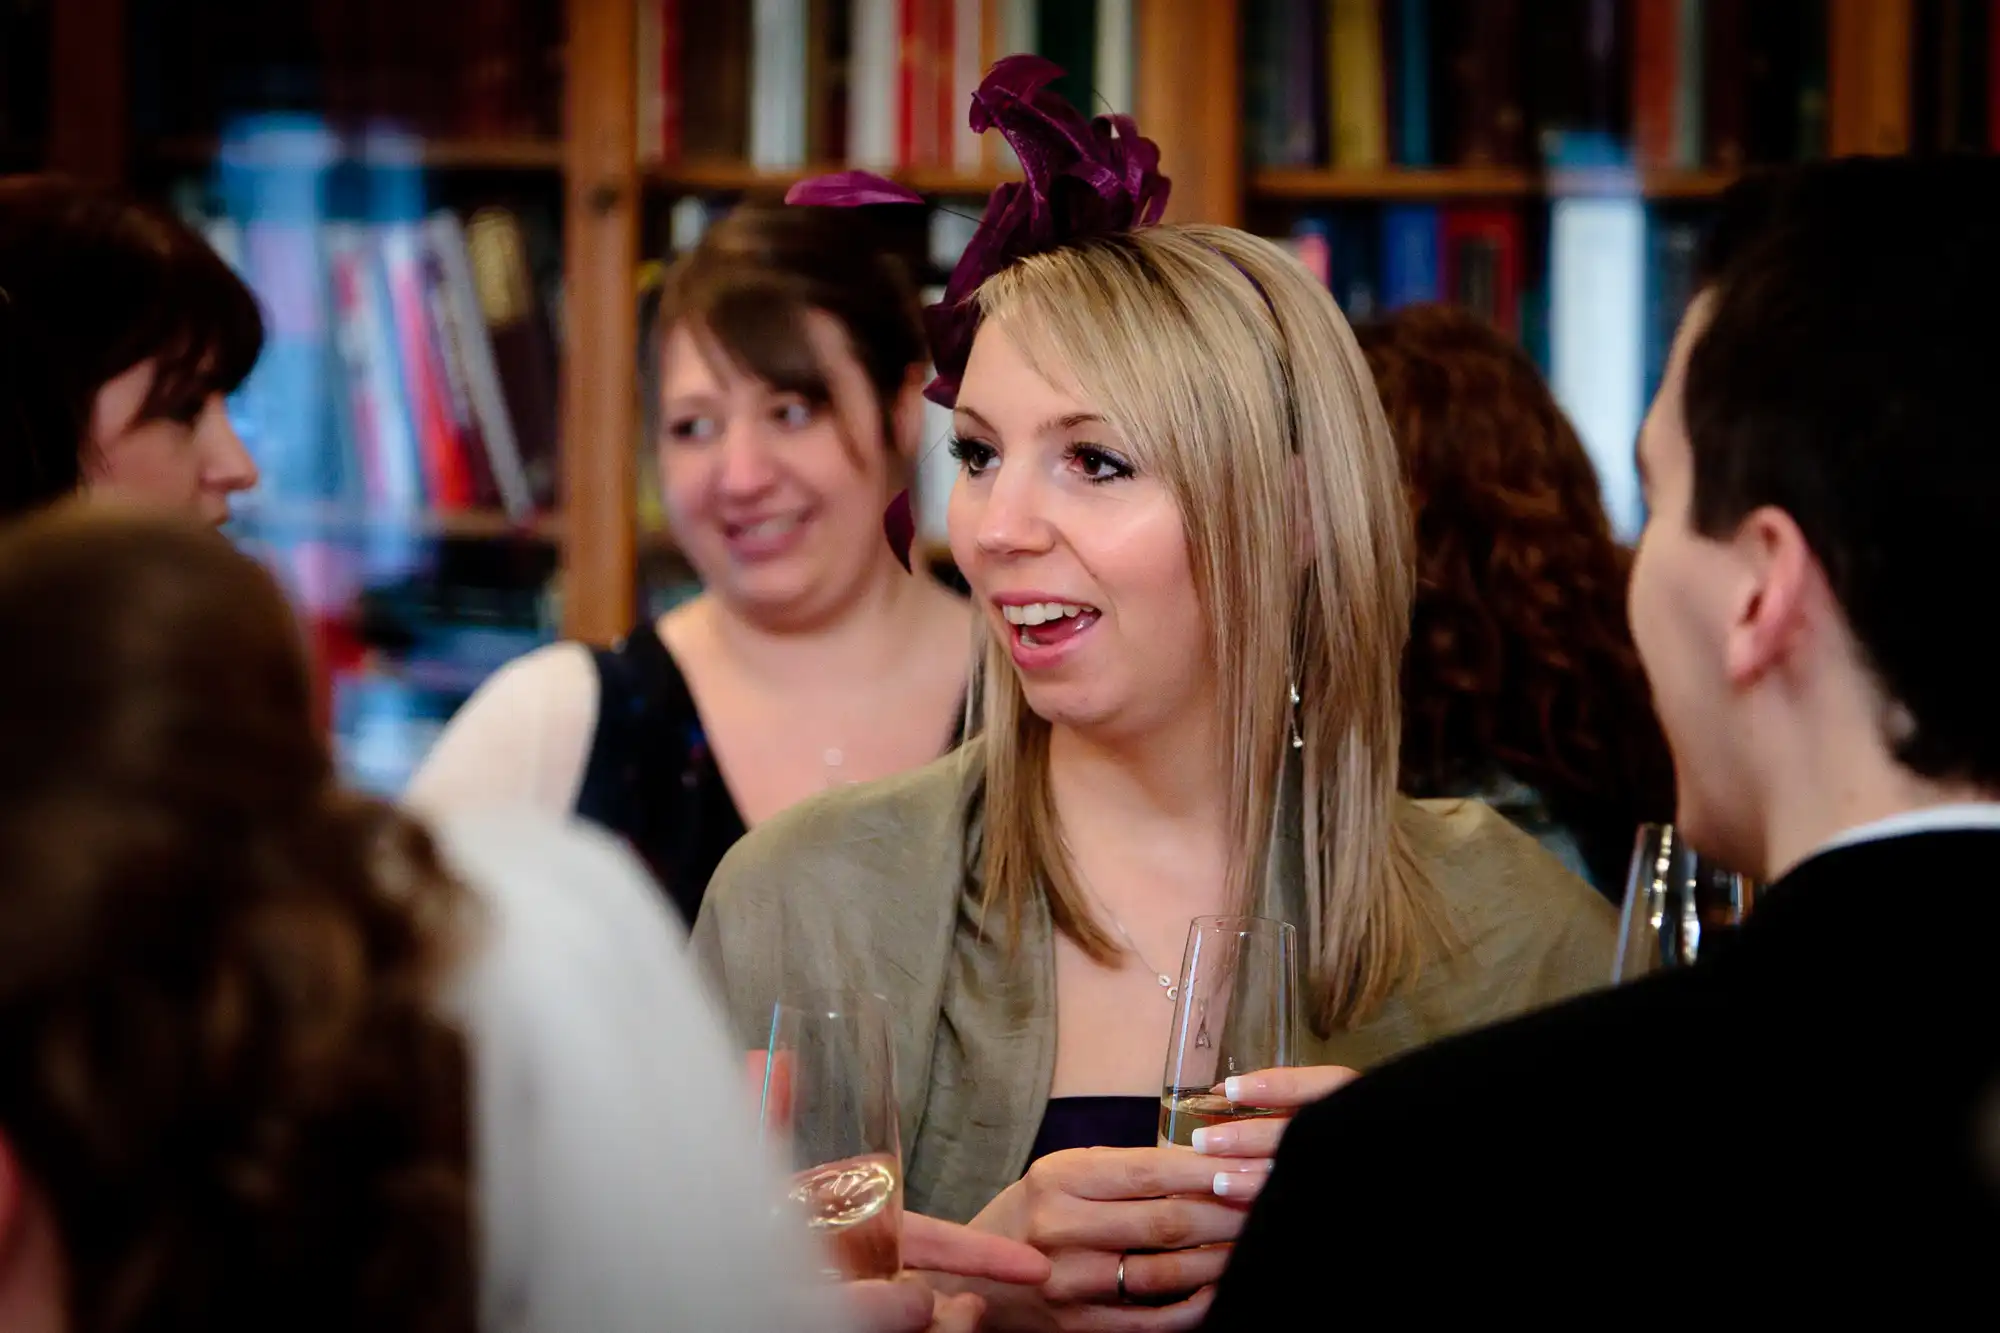 A woman with a purple fascinator talks animatedly with a group of people at a social gathering inside a room filled with bookshelves.